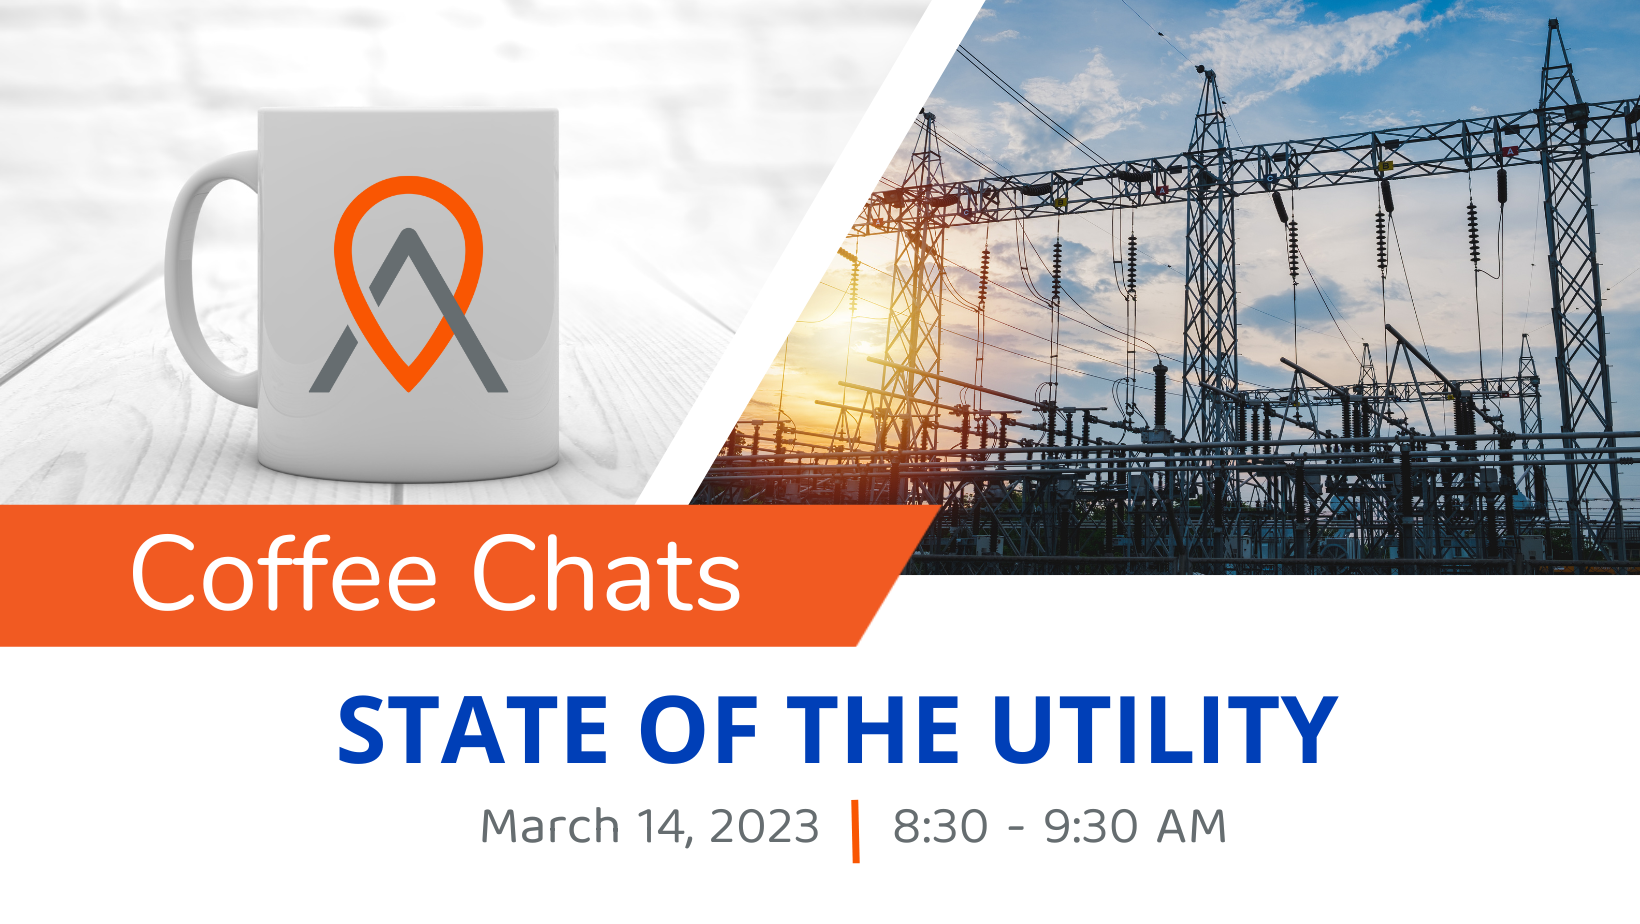 Event Promo Photo For Coffee Chats - State of the Utility